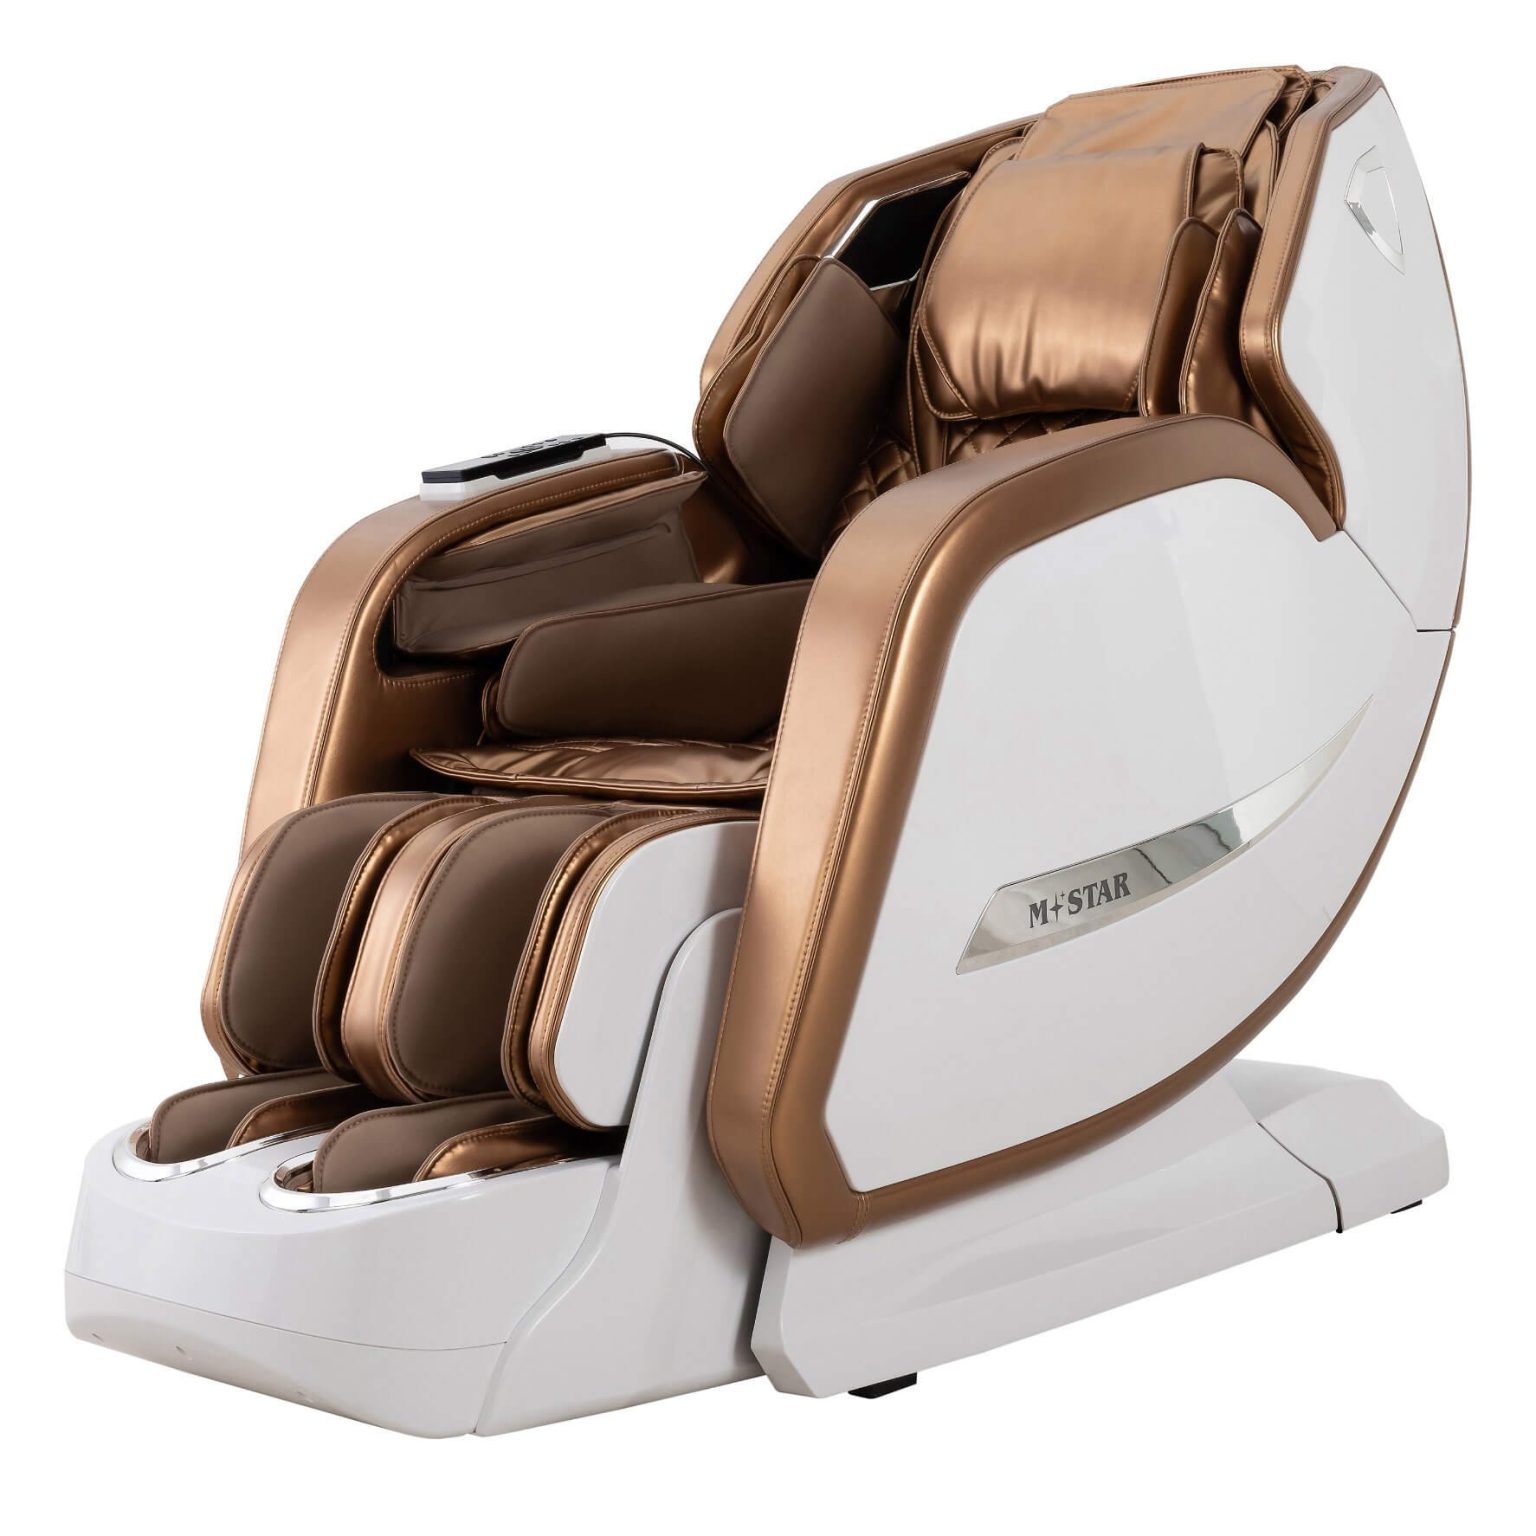 Back Massage Chair Positions for Females (Best Massage Chair 2020)